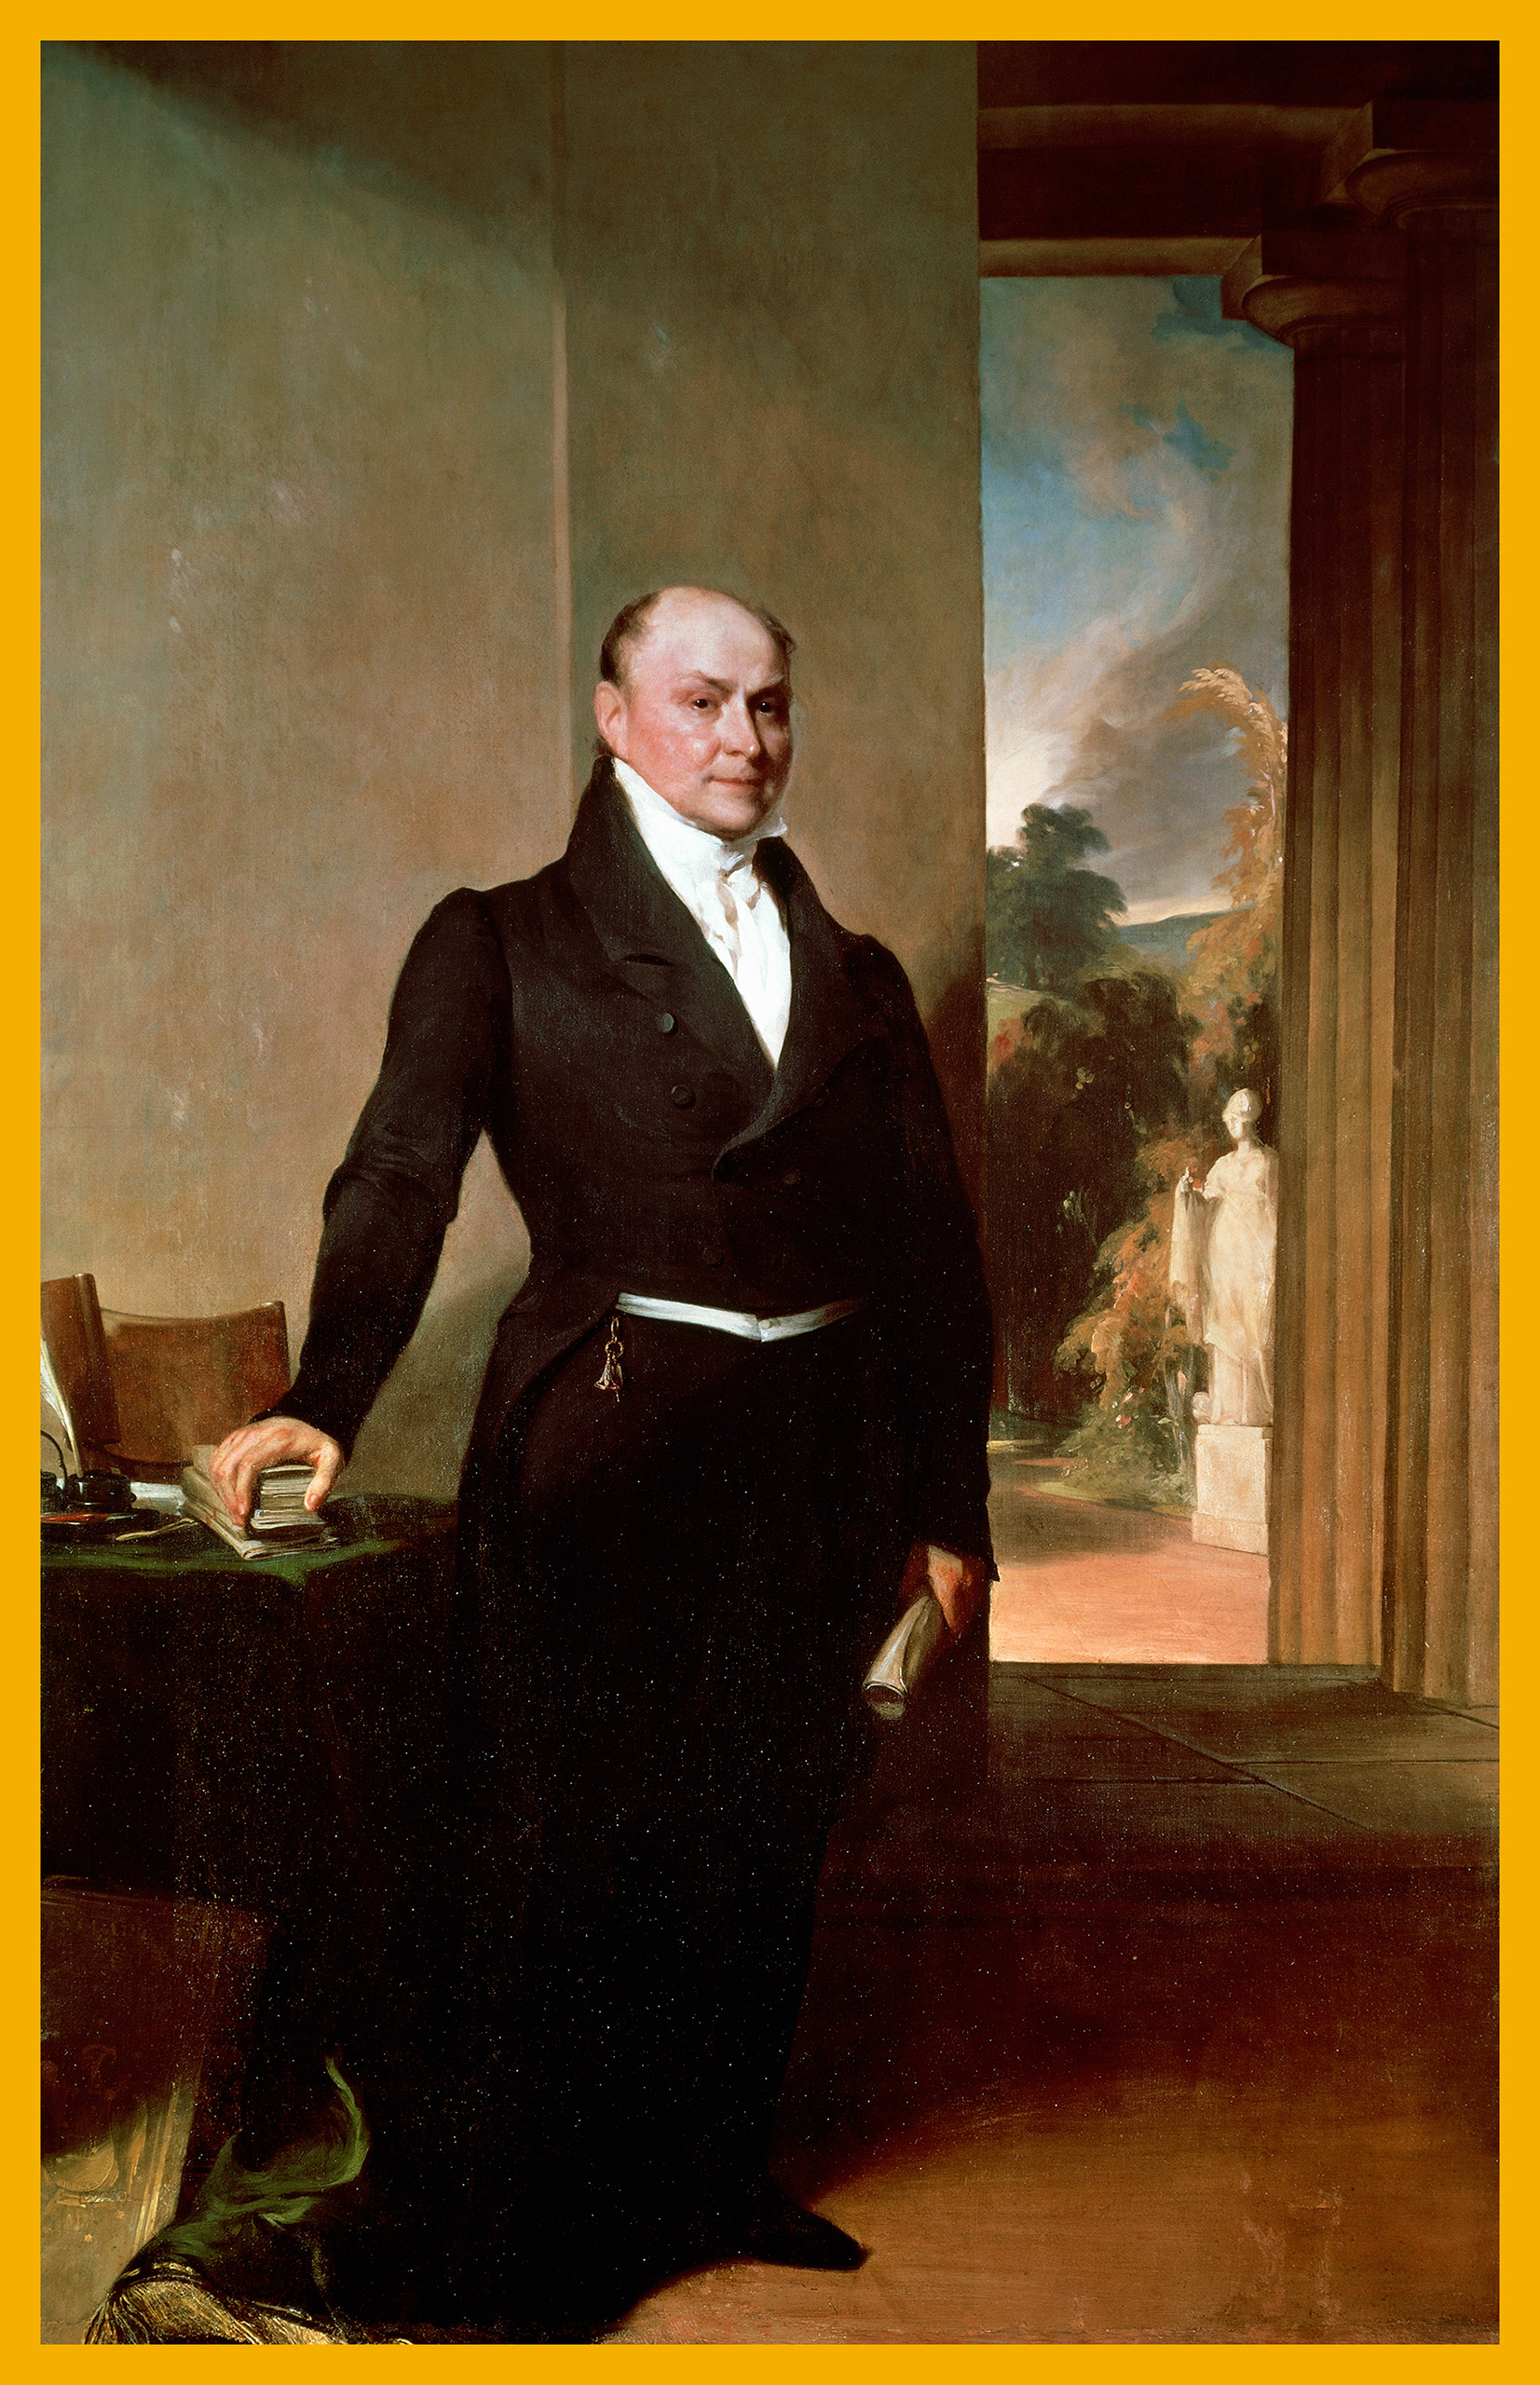 Portrait of John Quincy Adams, American politician, sixth President of the United States of America. (De Agostini Picture Library—Getty Images)